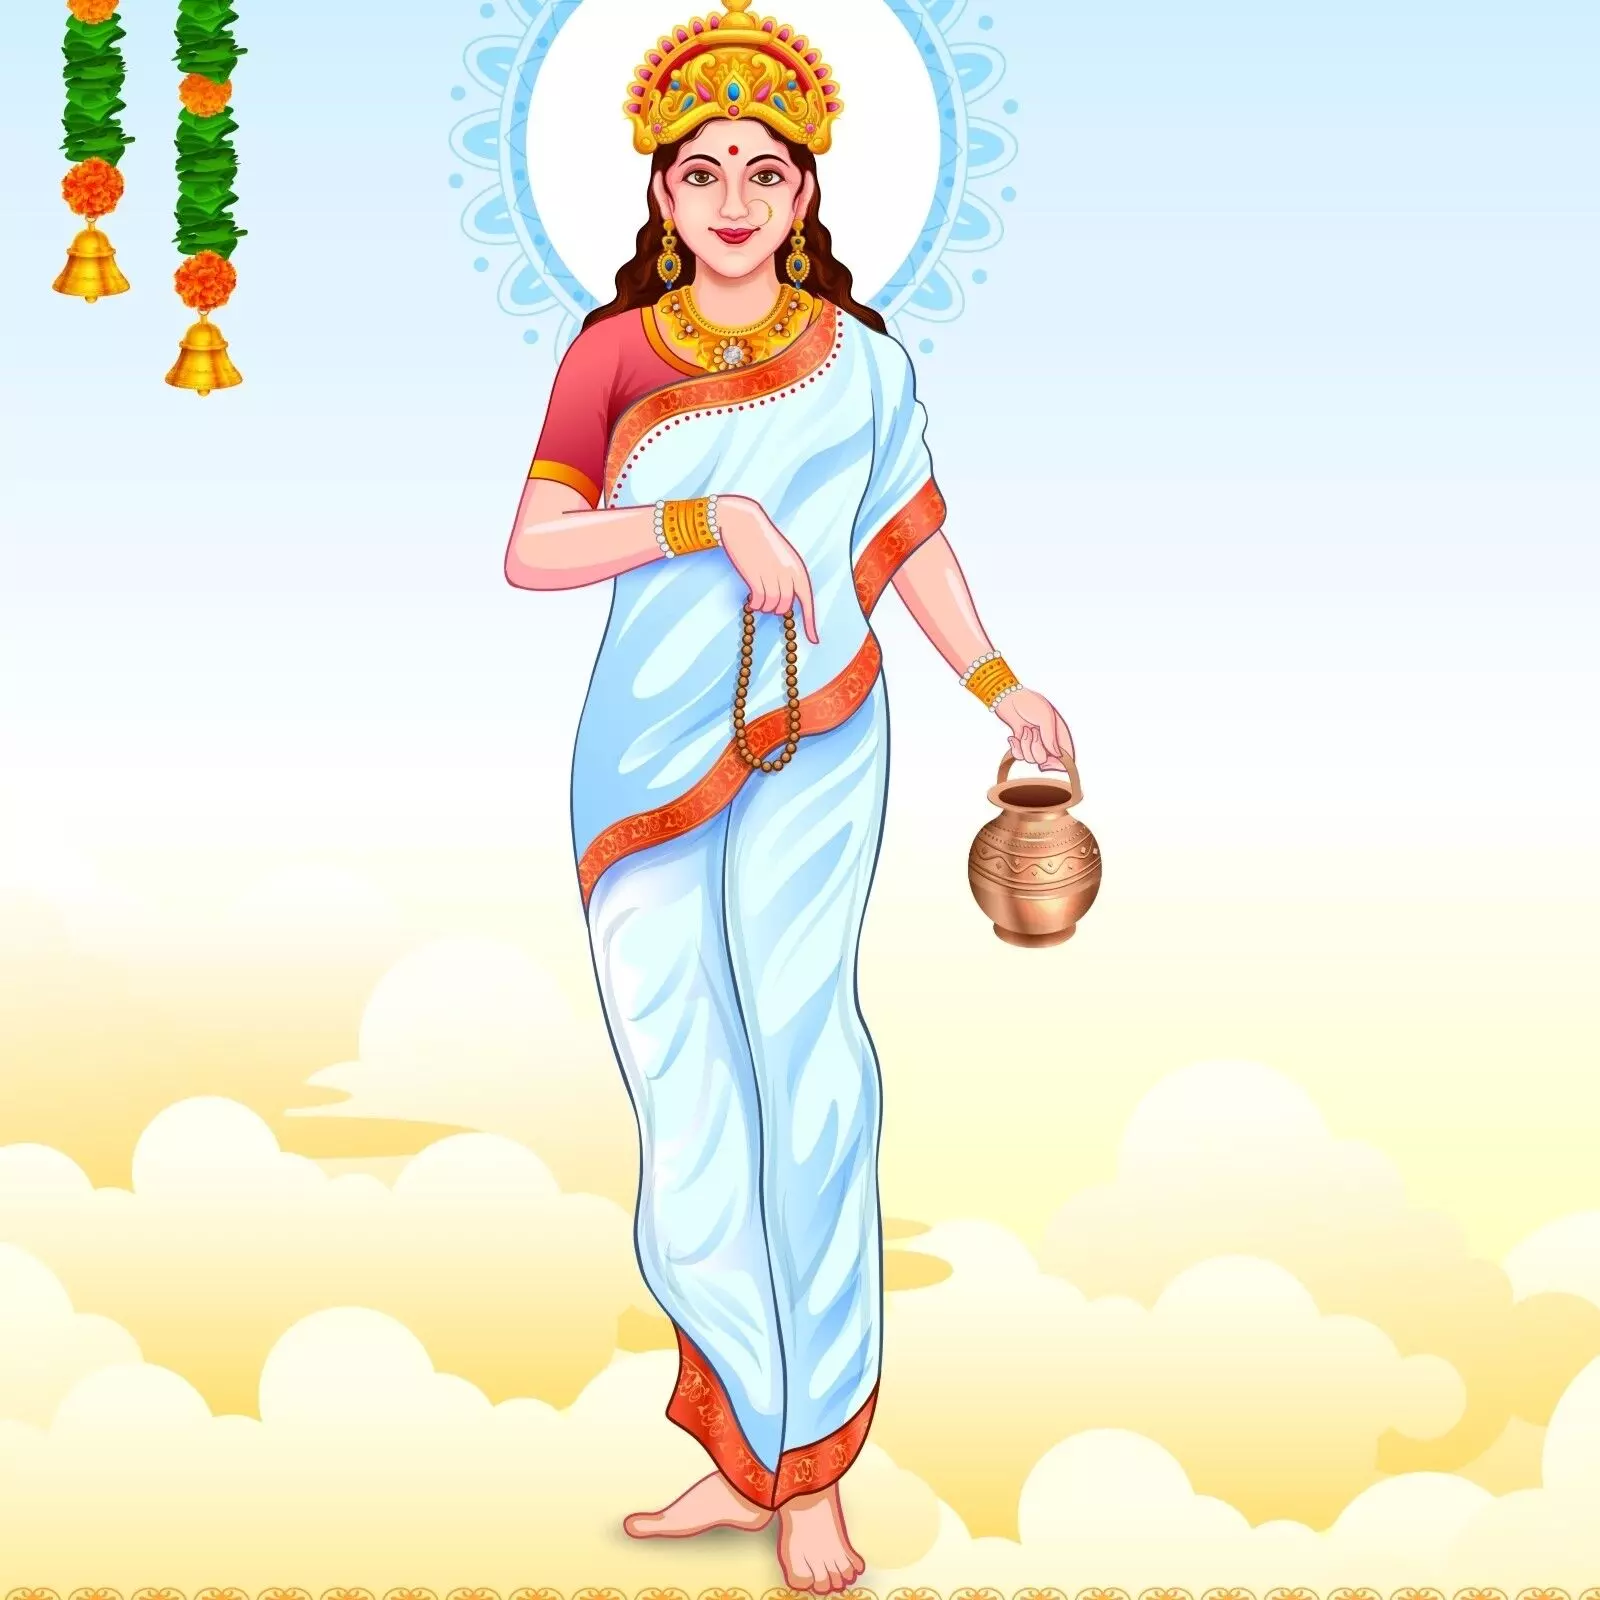 Second Day of Navratri- Brahmacharini, know the worship method, mantra and aarti